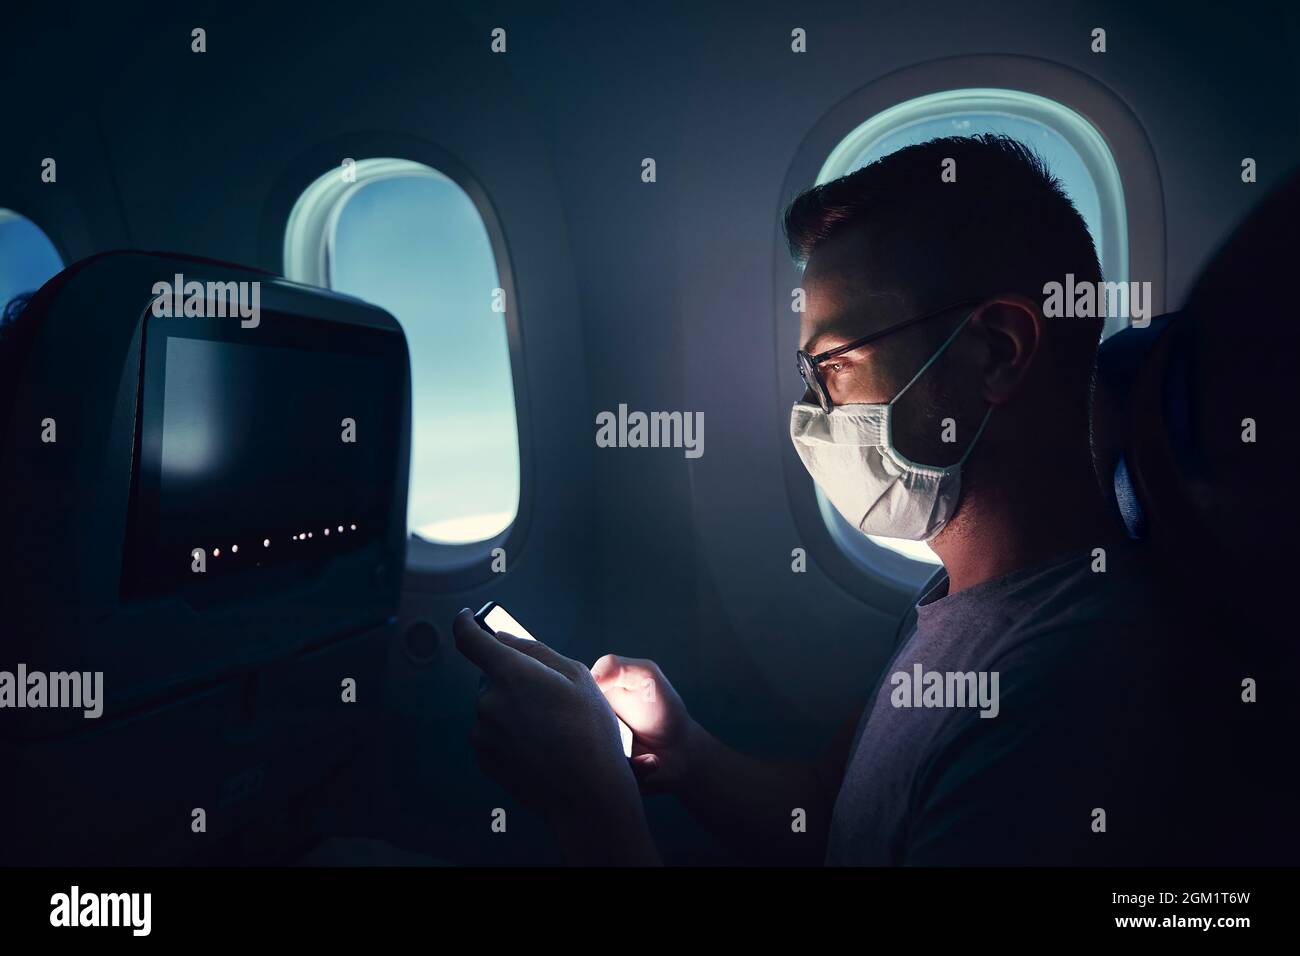 Man with face mask traveling by airplane. Passenger using phone during flight. Stock Photo